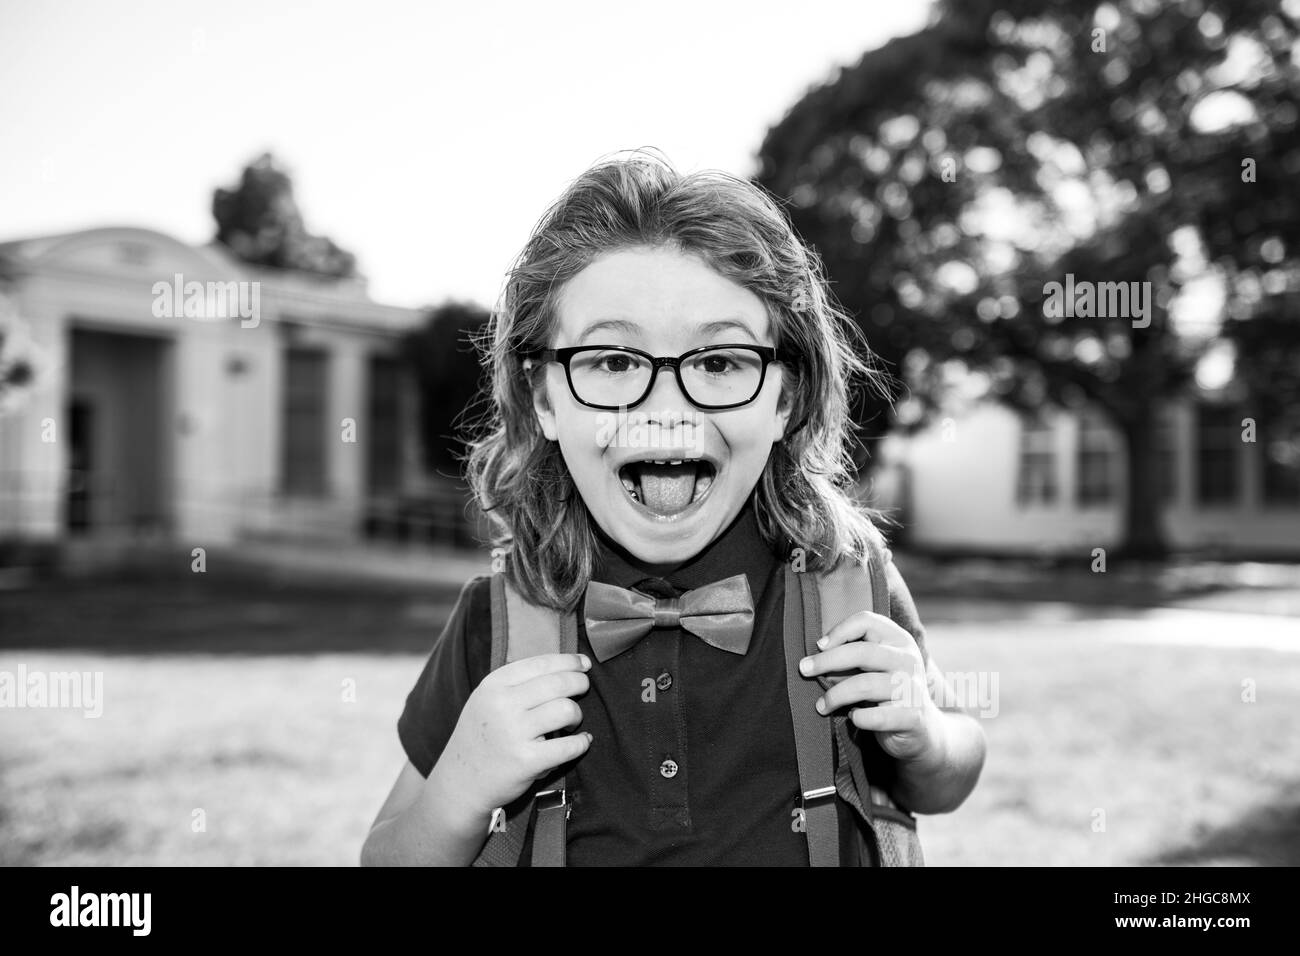 Schoolboy ready to study. Education and learning for kids. Portrait of elementary amazed pupil in school park. Stock Photo